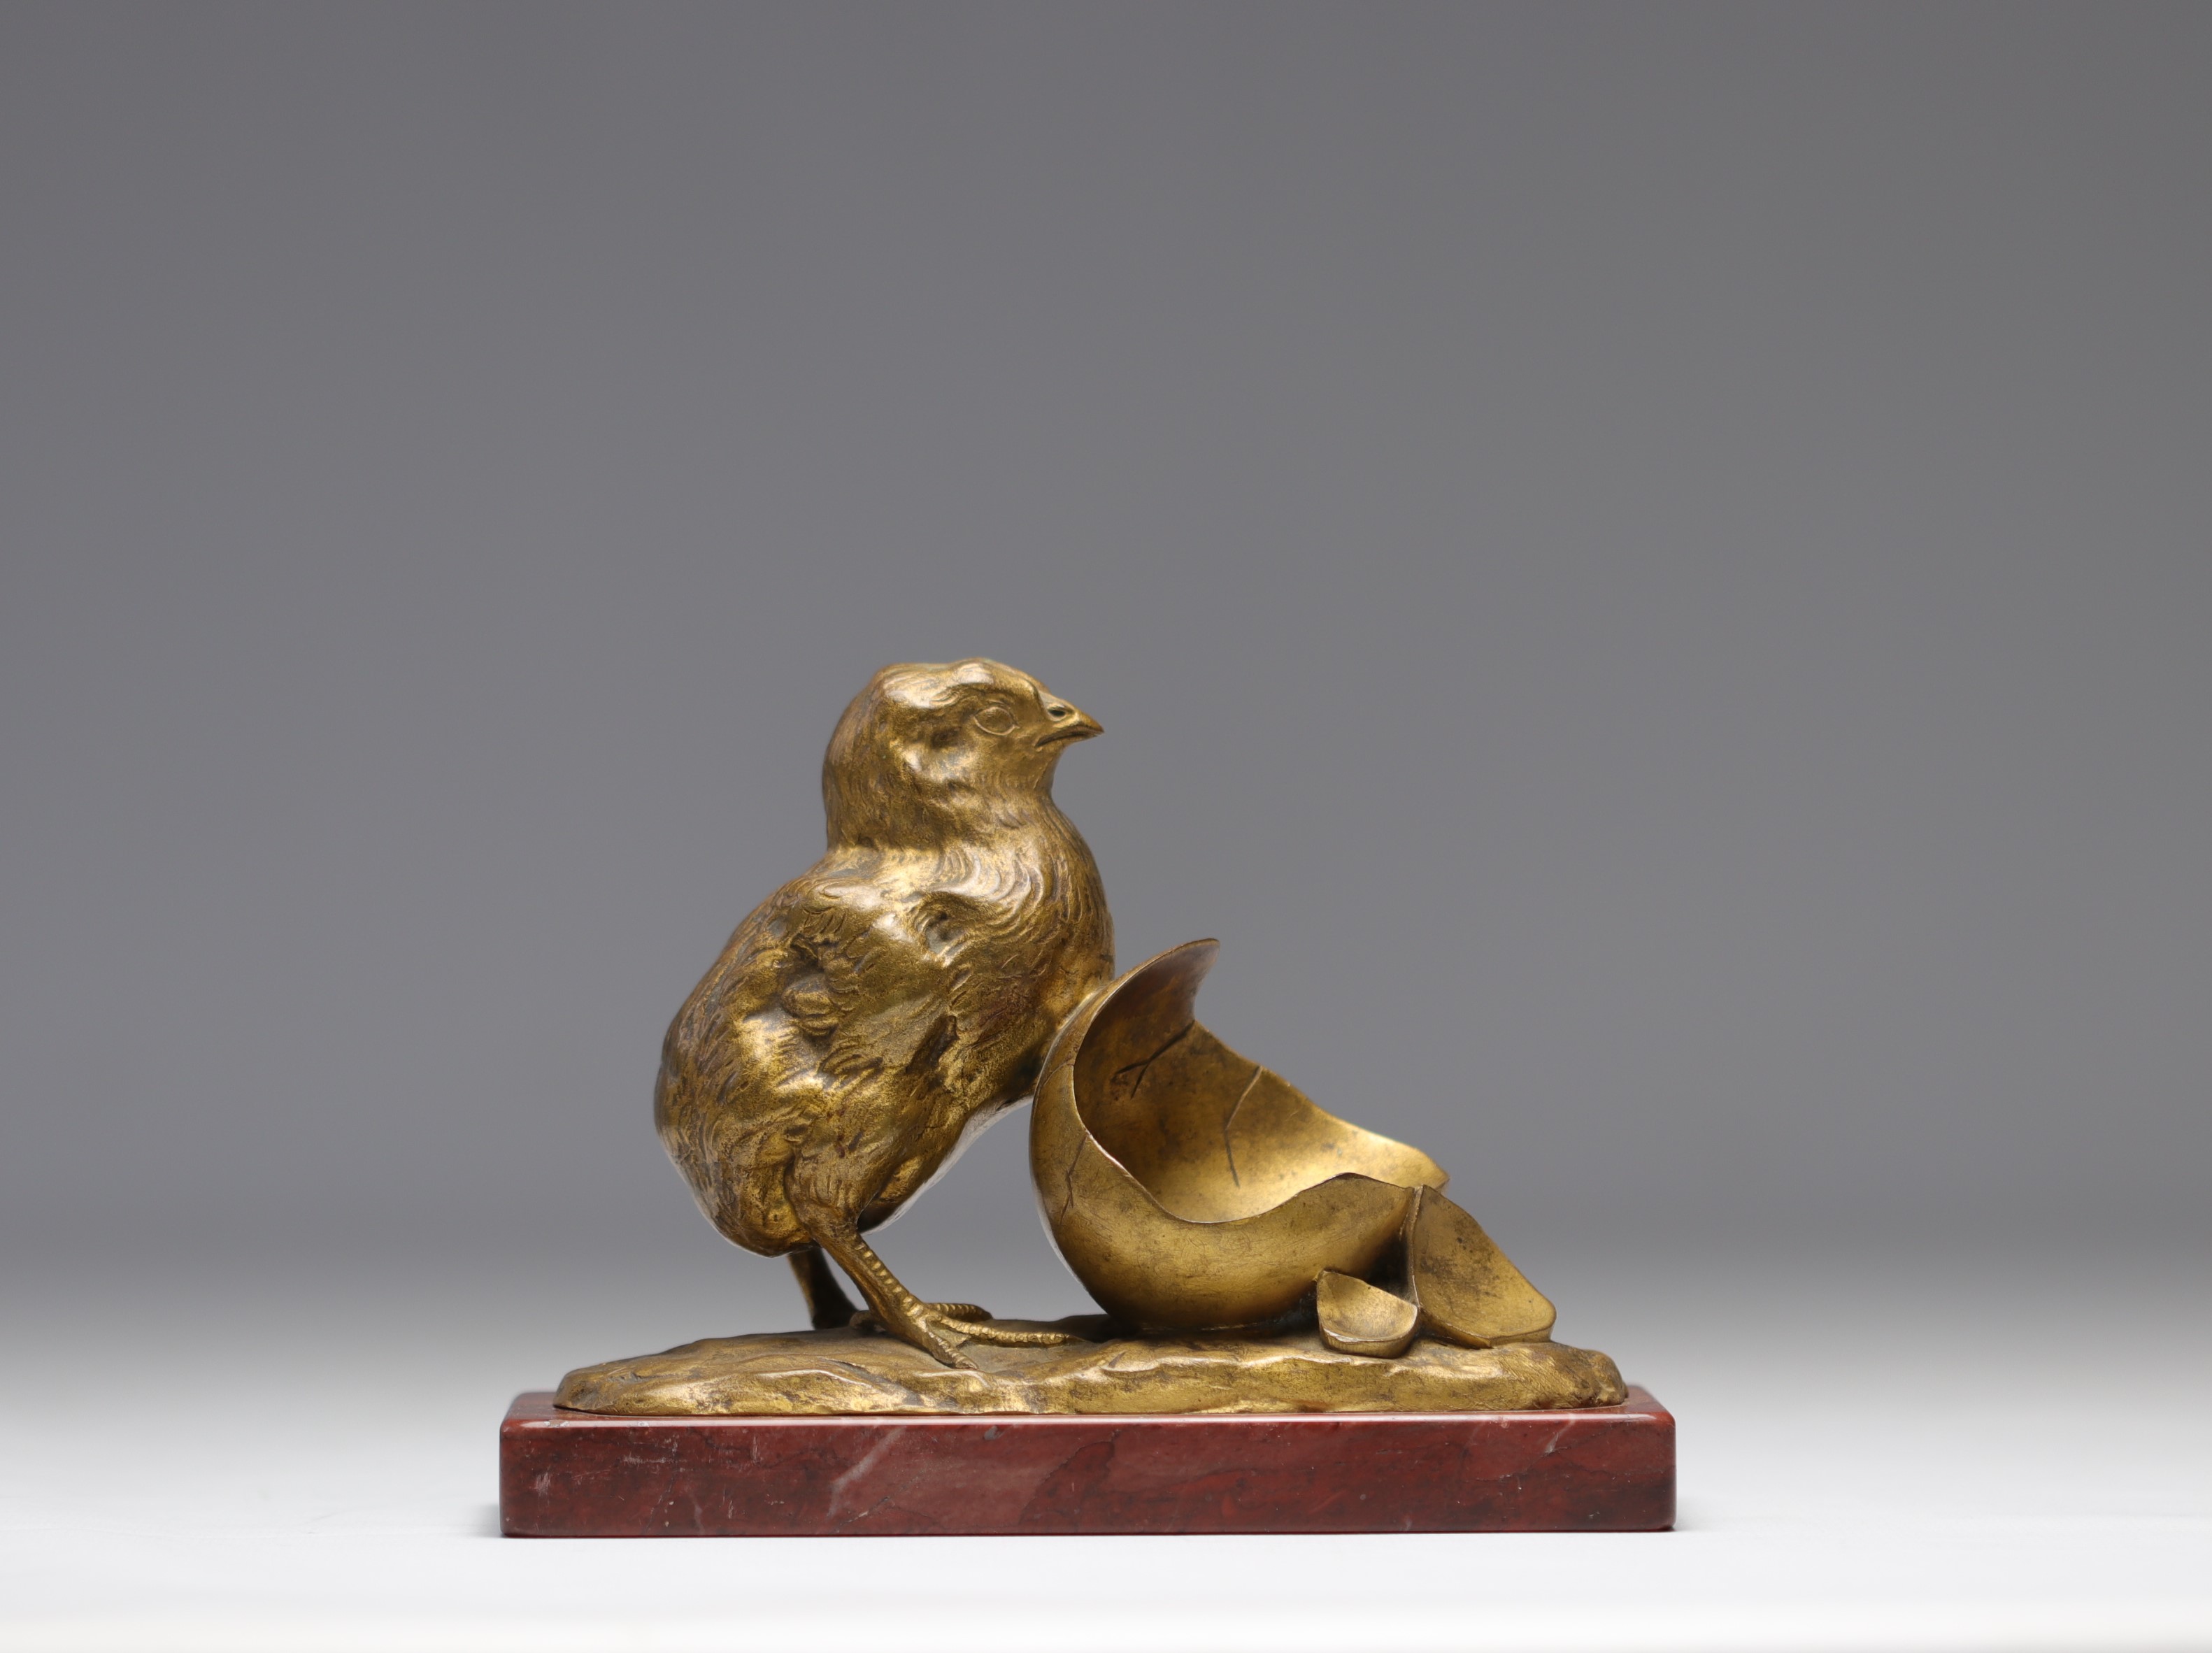 GARDET Georges (1863-1939) "The chick coming out of the egg" in bronze with a golden patina, signed